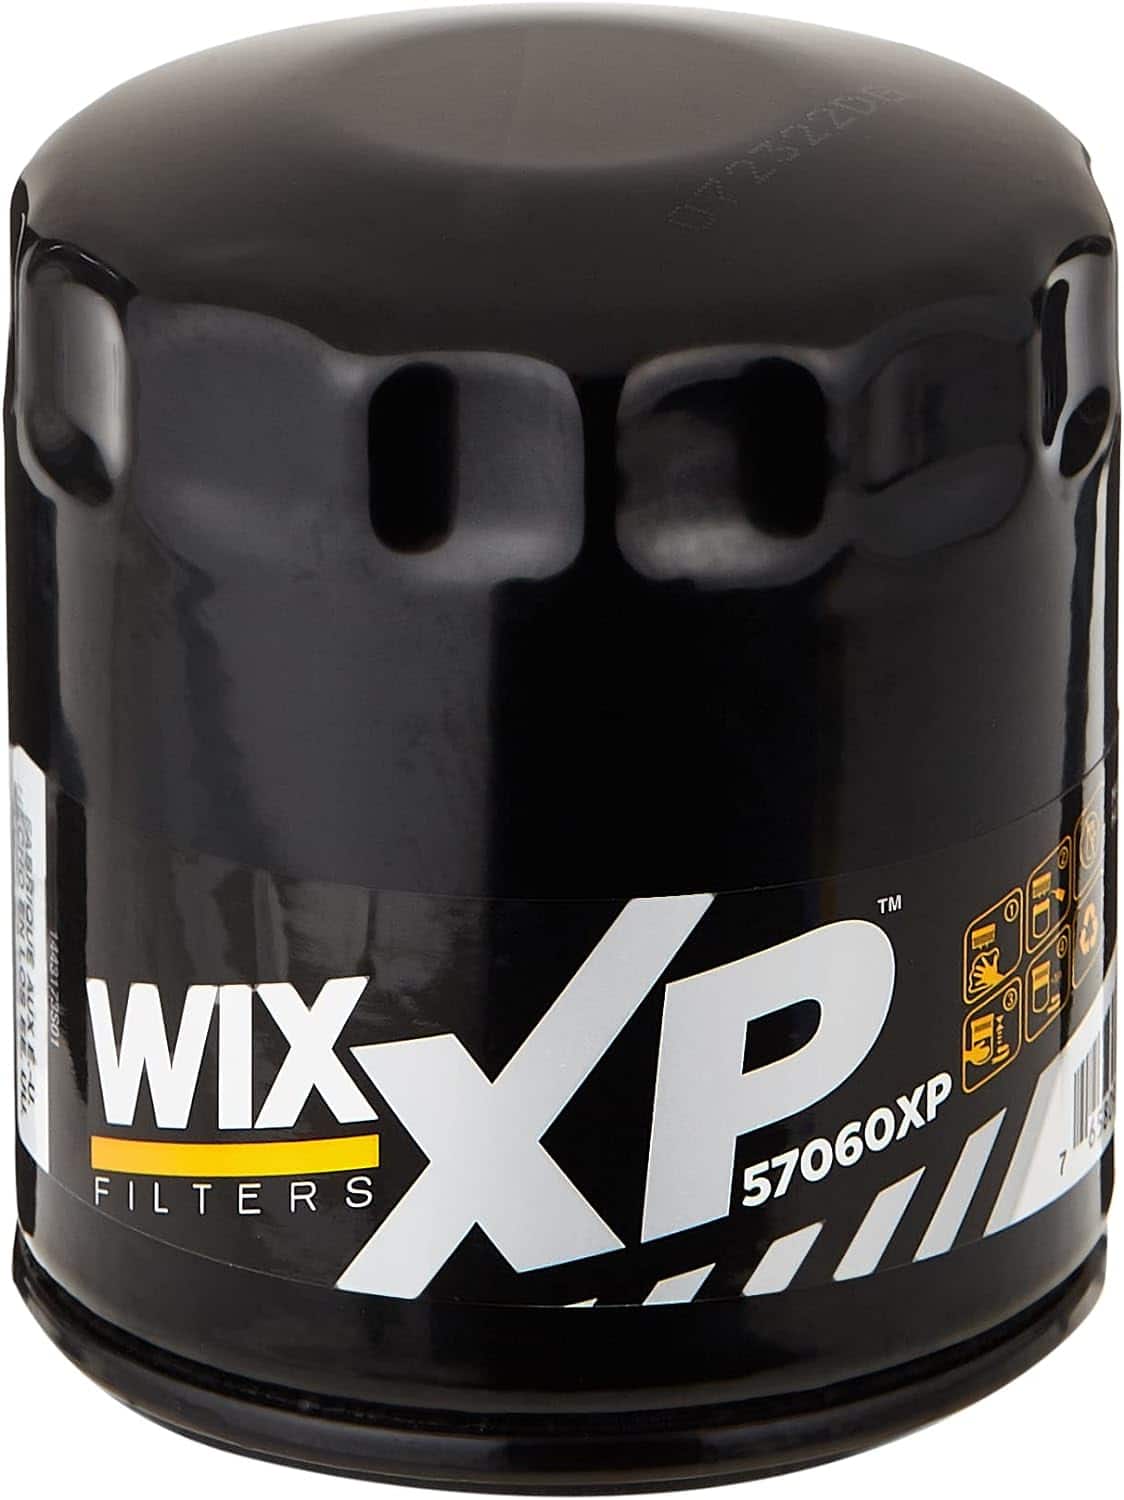 One of the best engine oil filters ; Wix XP oil filter on a white background.